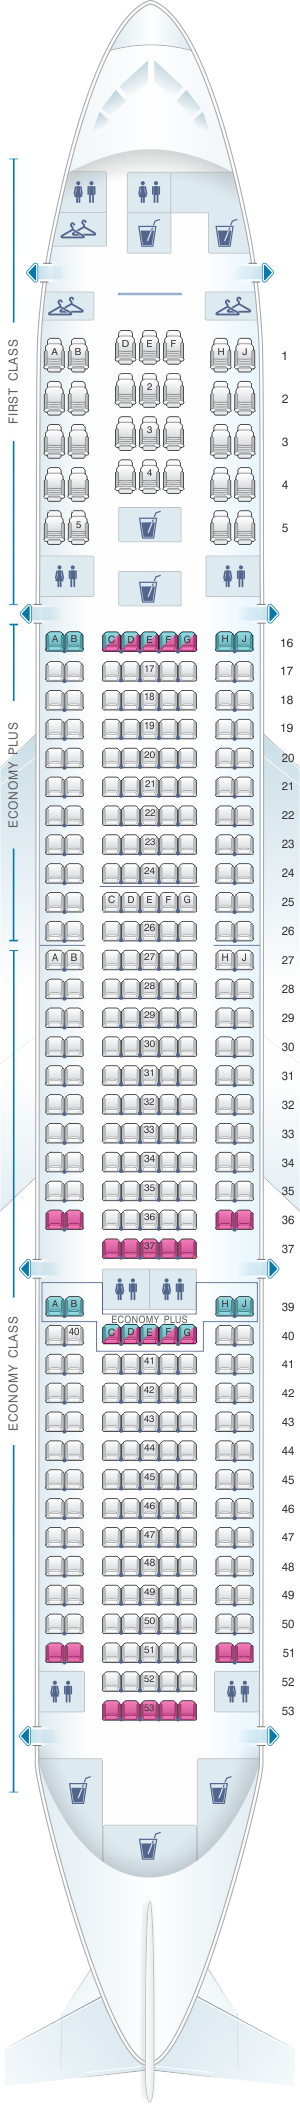 united airlines seat map boeing 777 300er